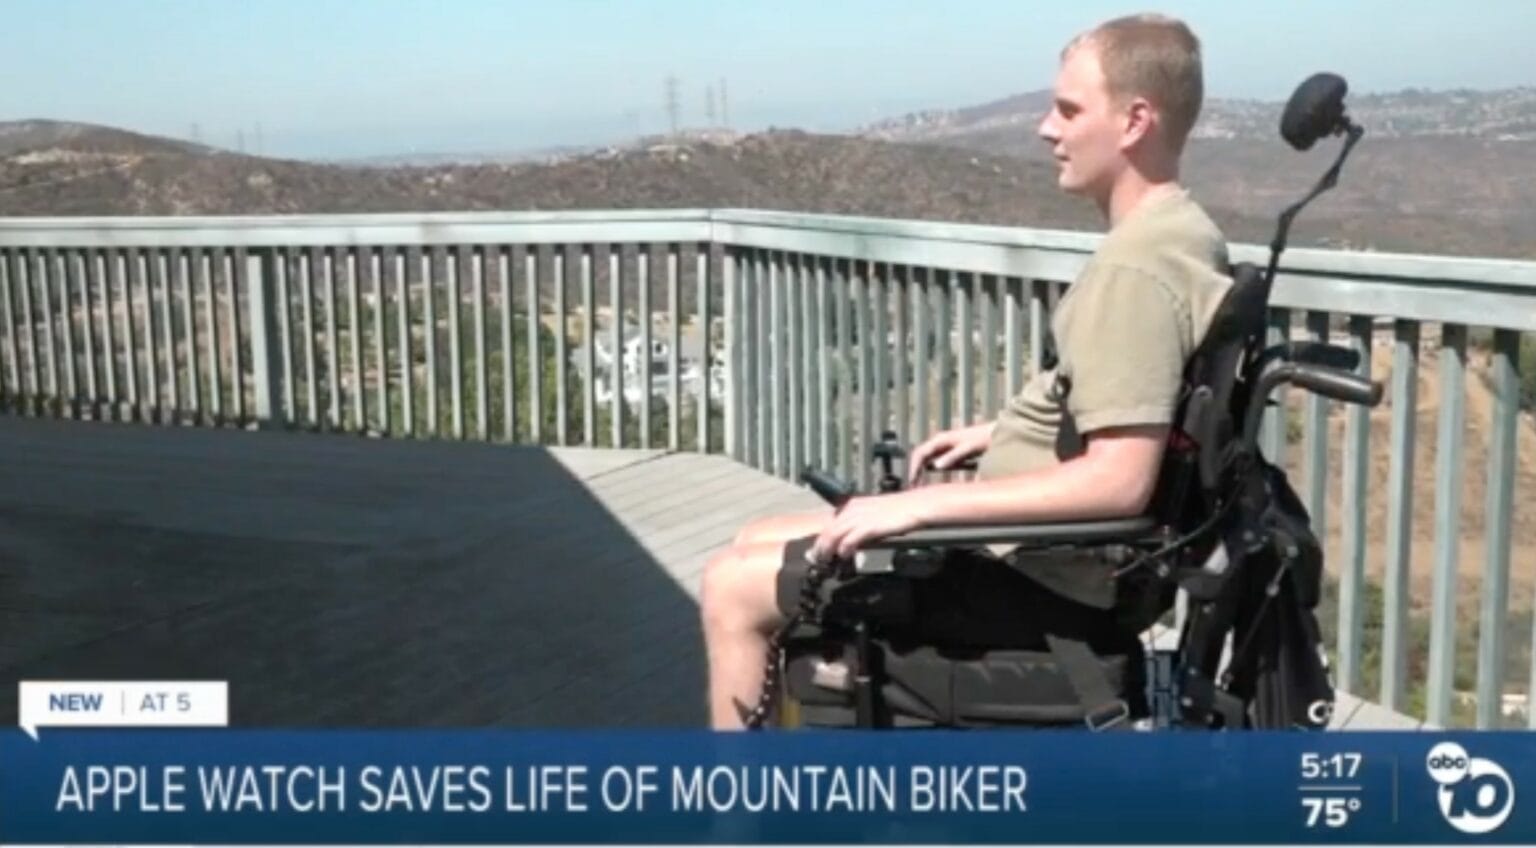 Paralyzed in the crash, Ryan McConnaughey said he'd be dead if not for the Apple Watch.